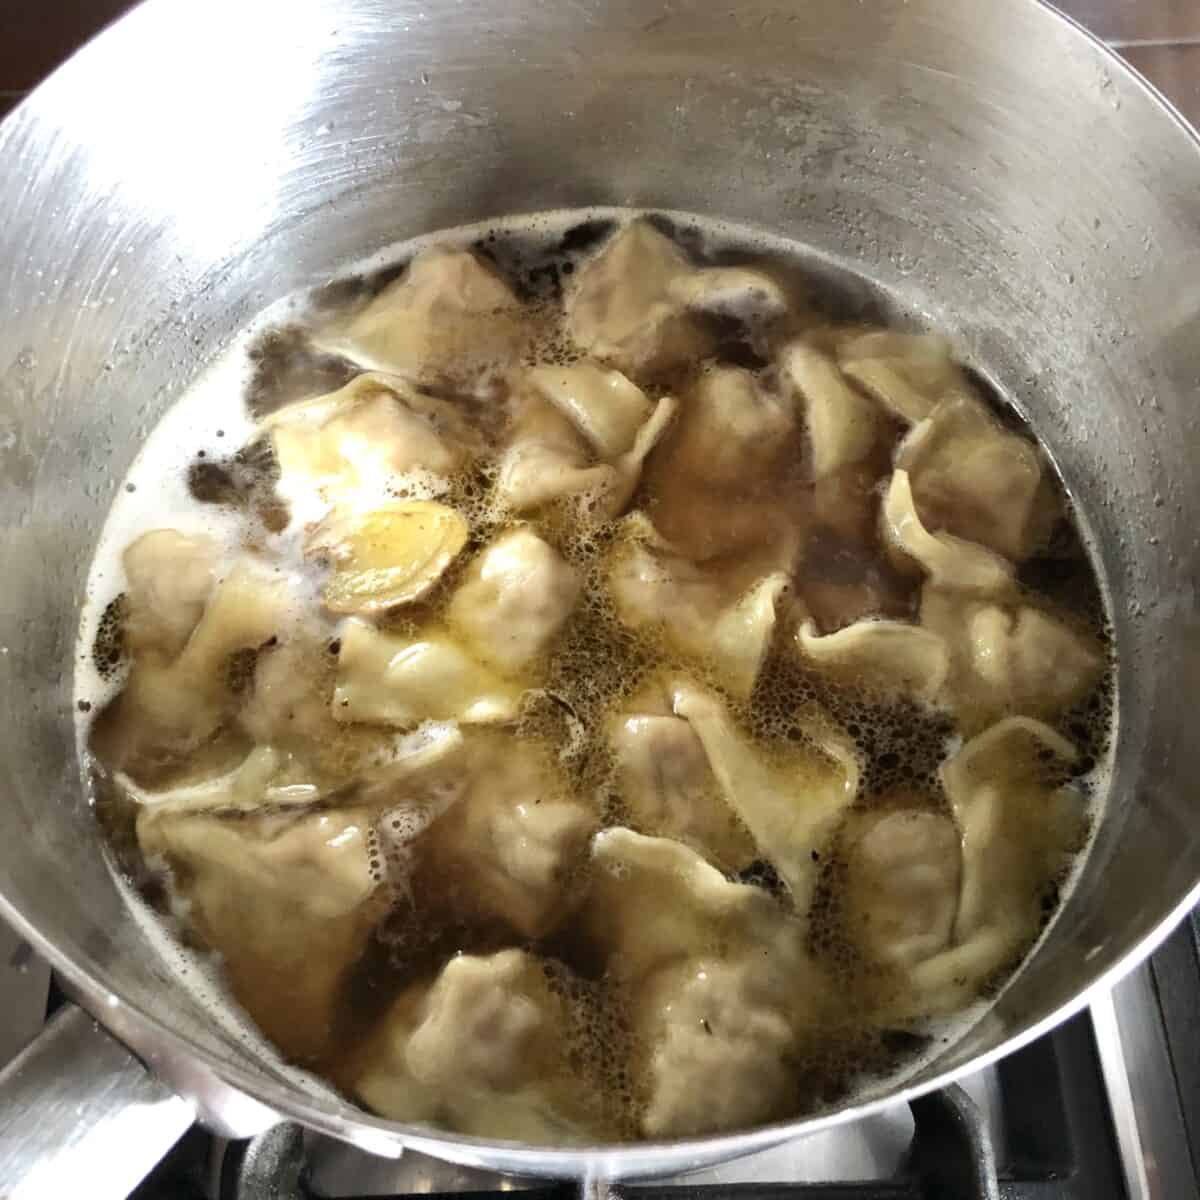 wontons floating on top and fully cooked